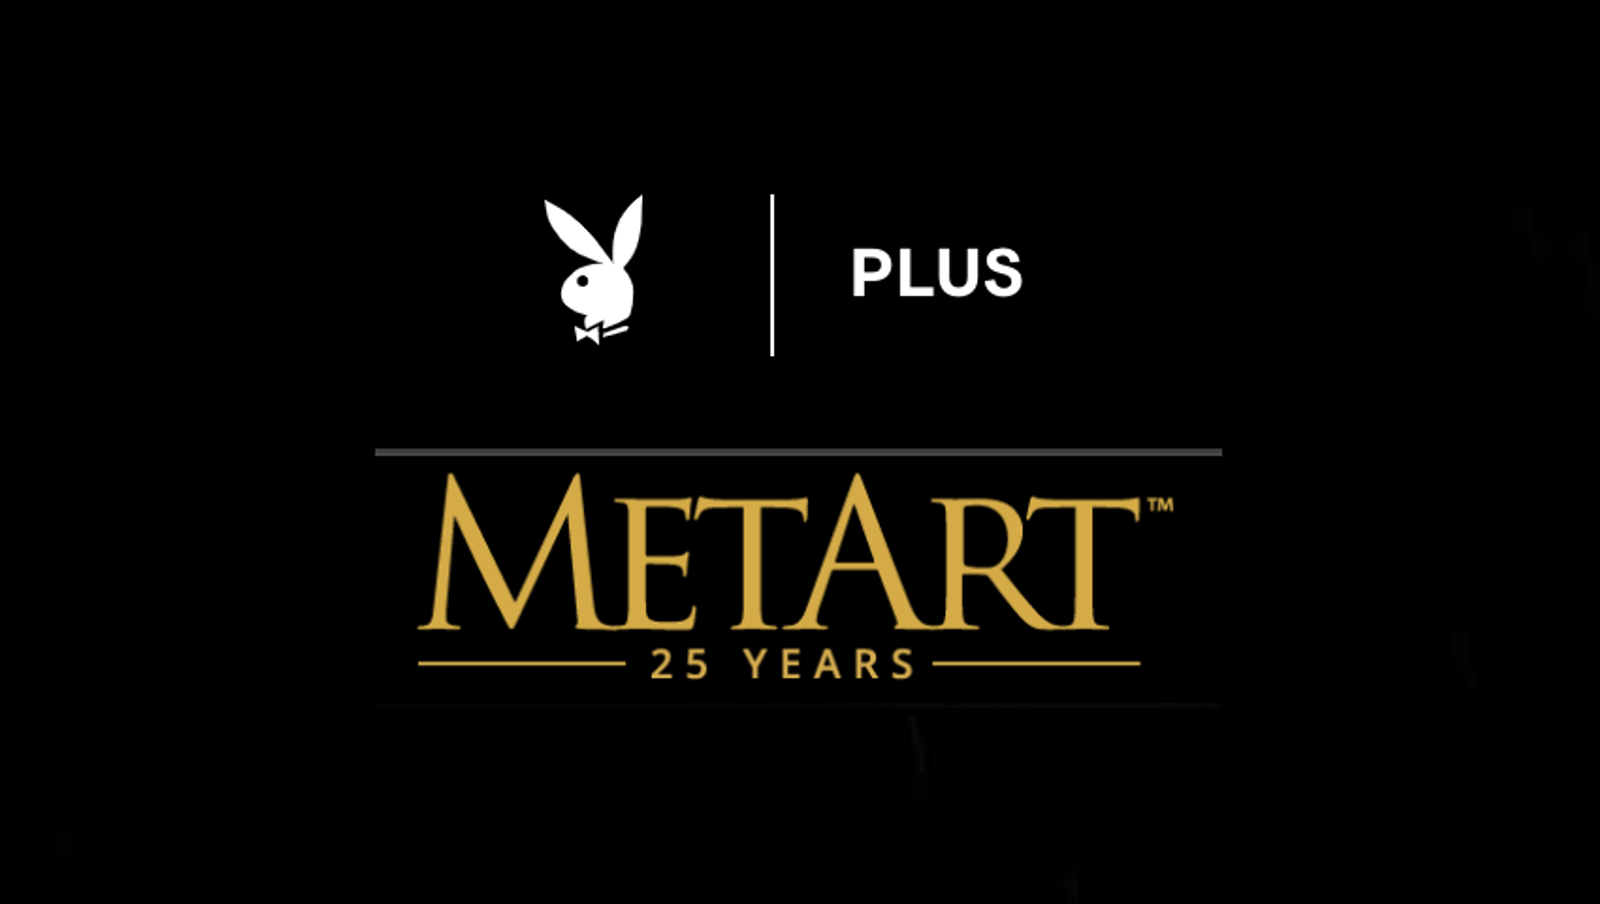 Playboy Plus, MetArt Join Forces for New Exclusive Scenes